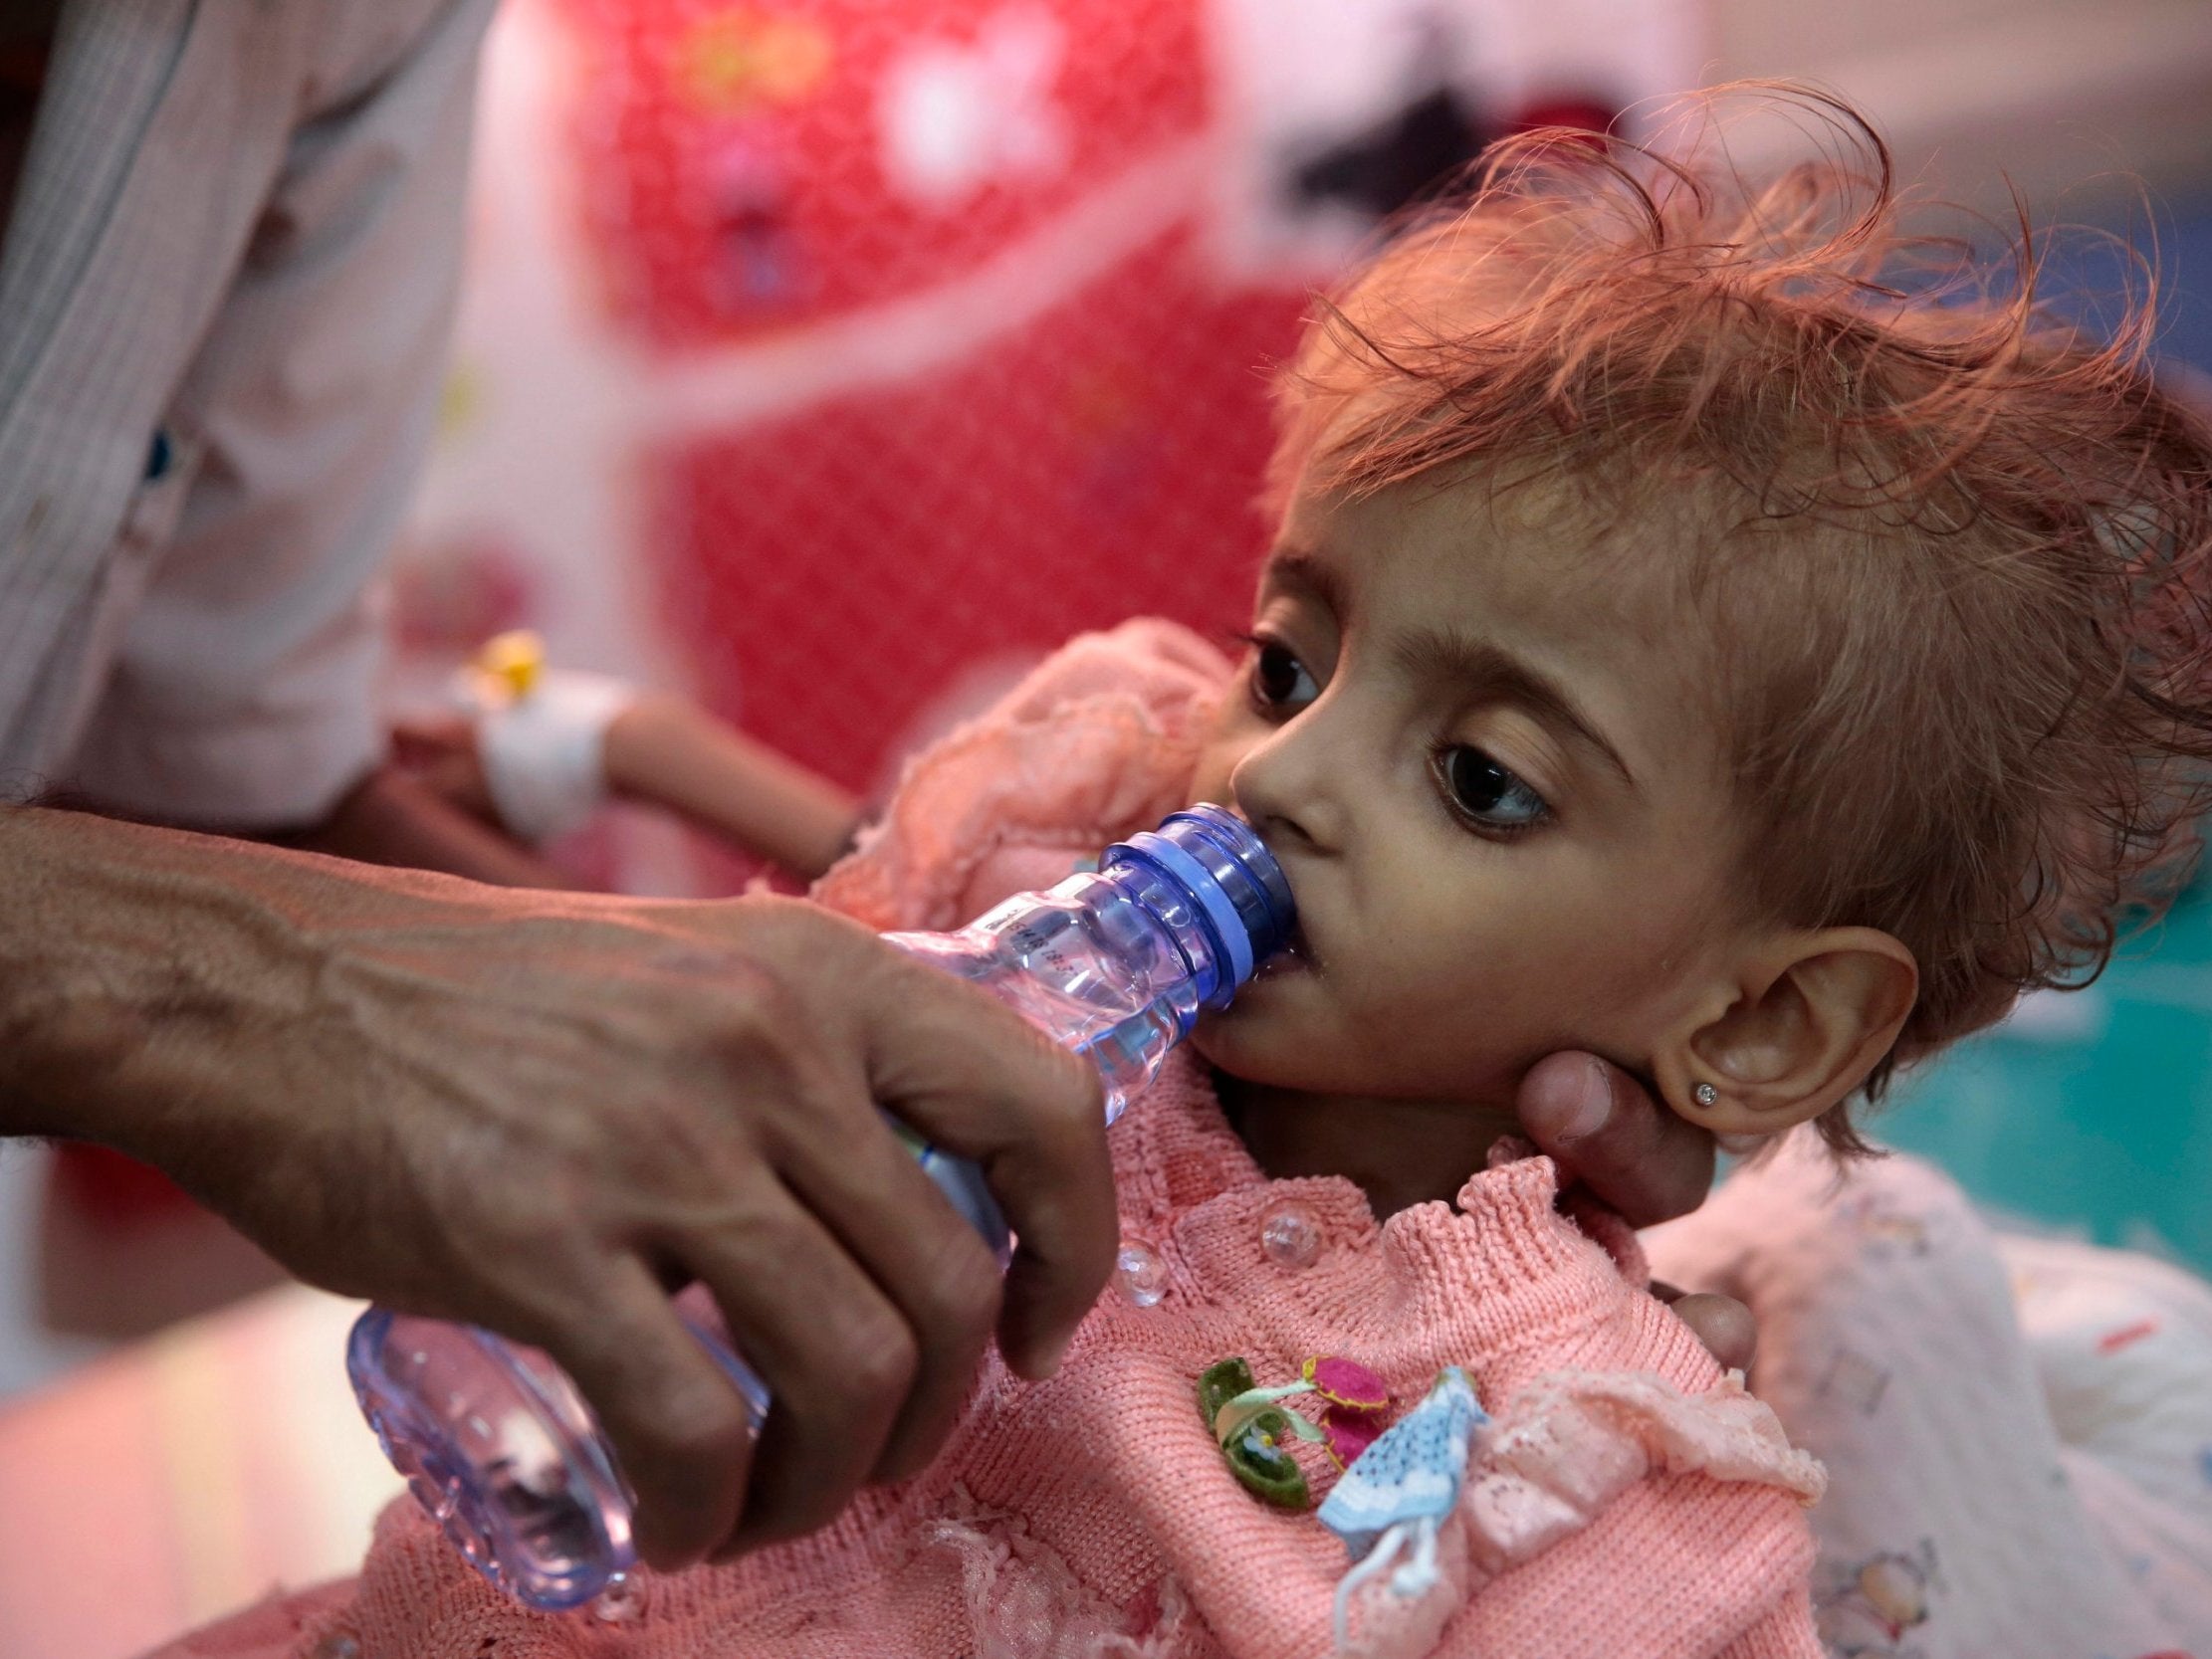 The photo, which is similar to this one of a malnourished girl in Yemen, was temporarily banned